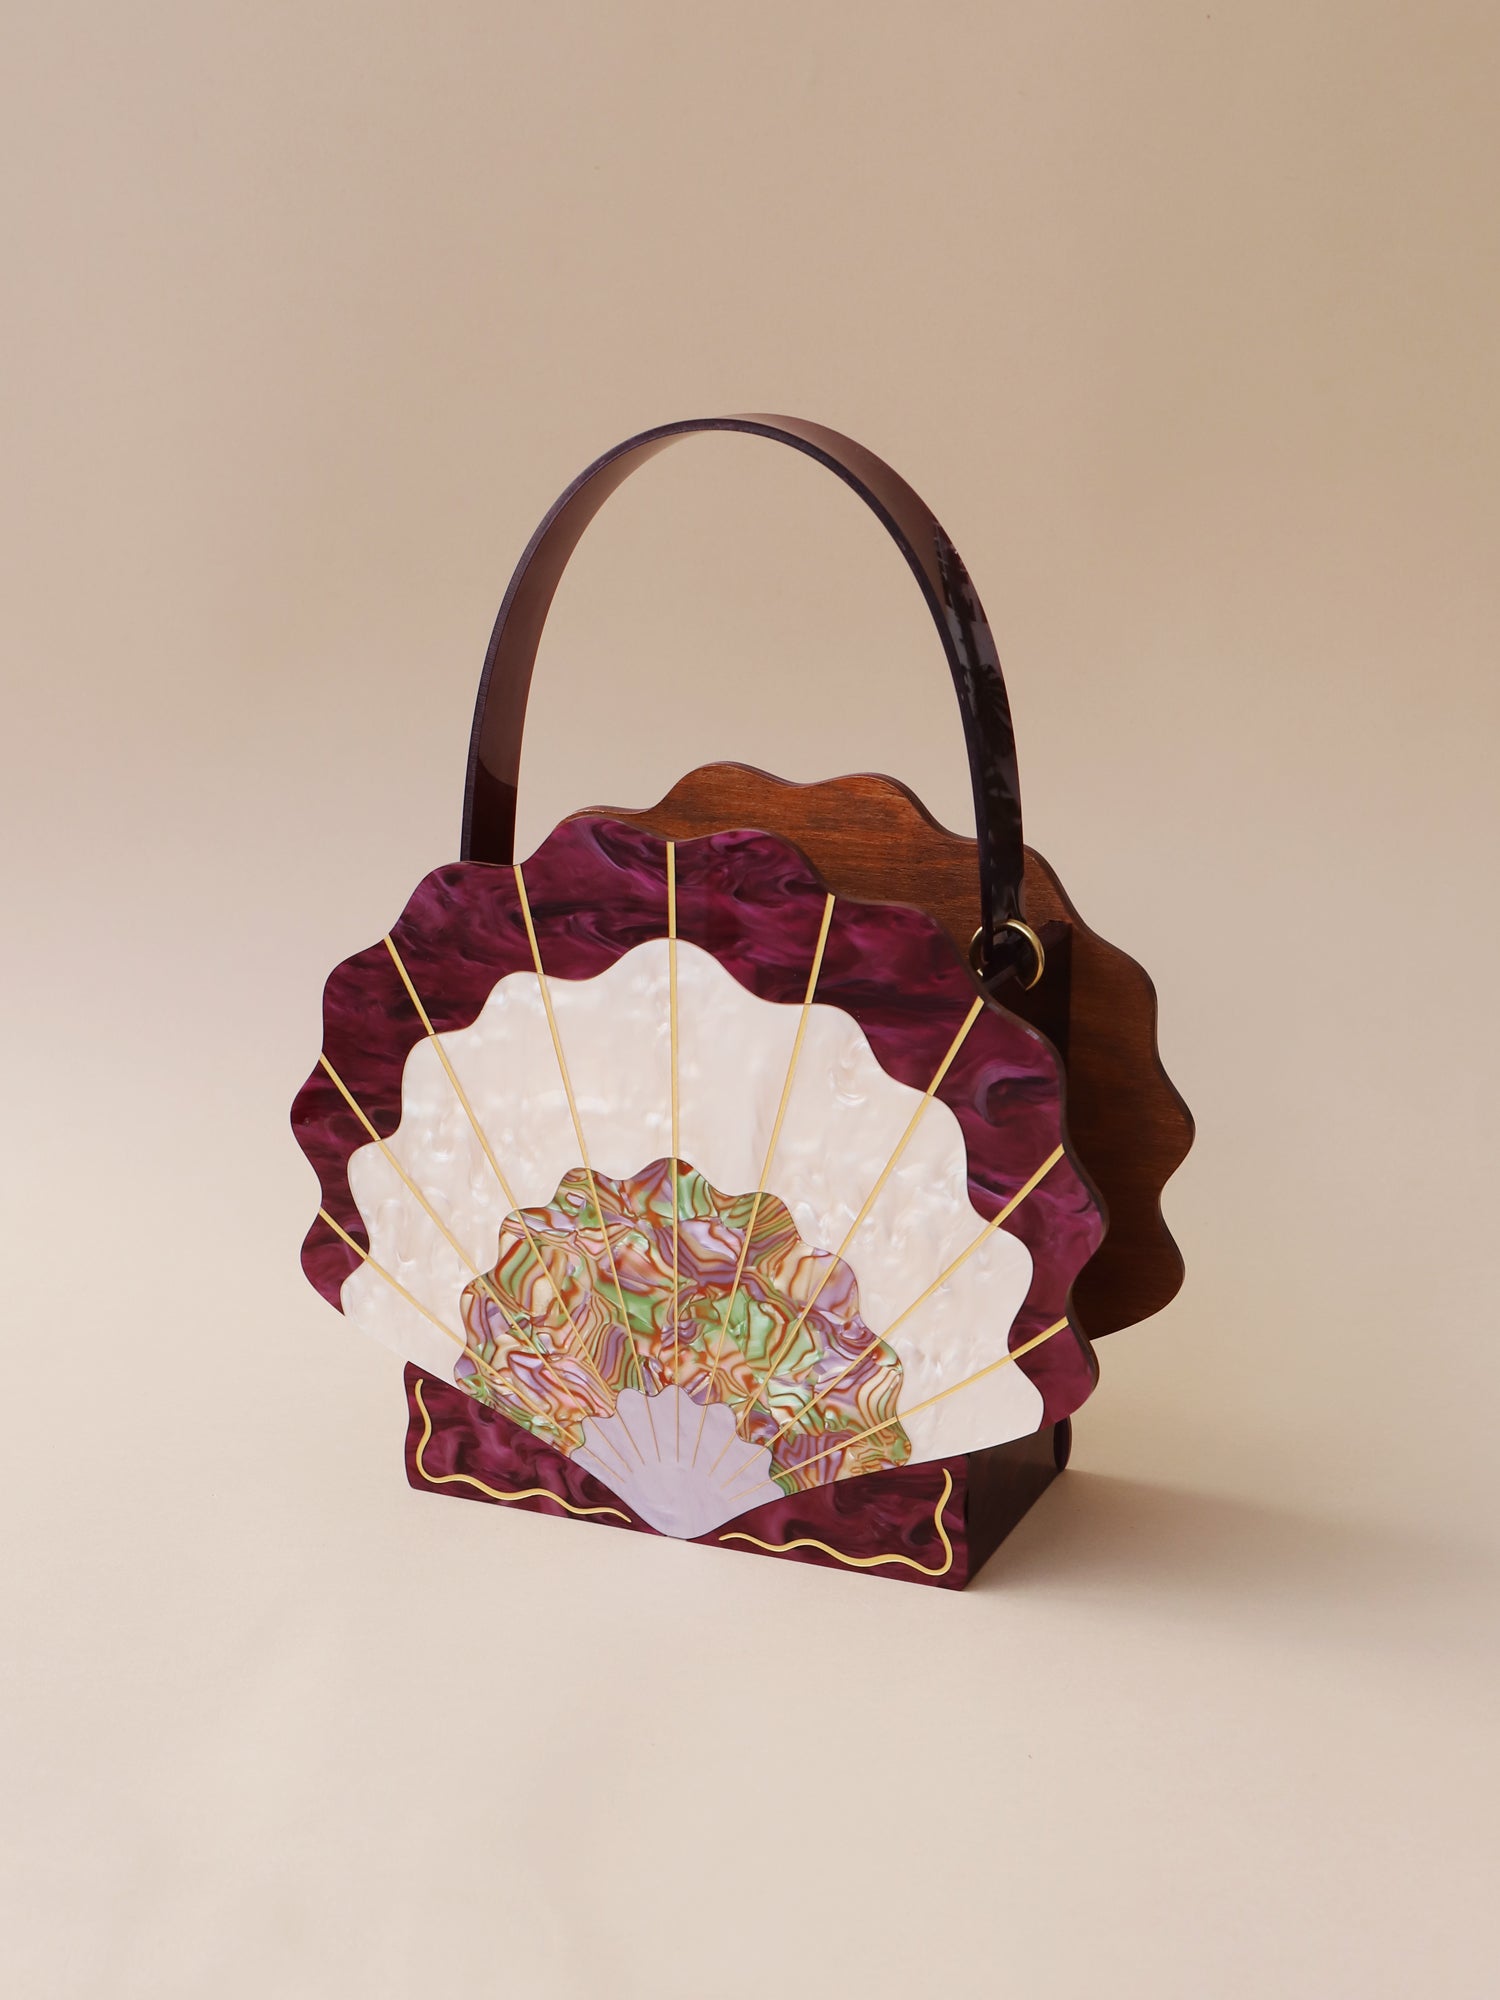 Scallop Shell Bag in Cherry